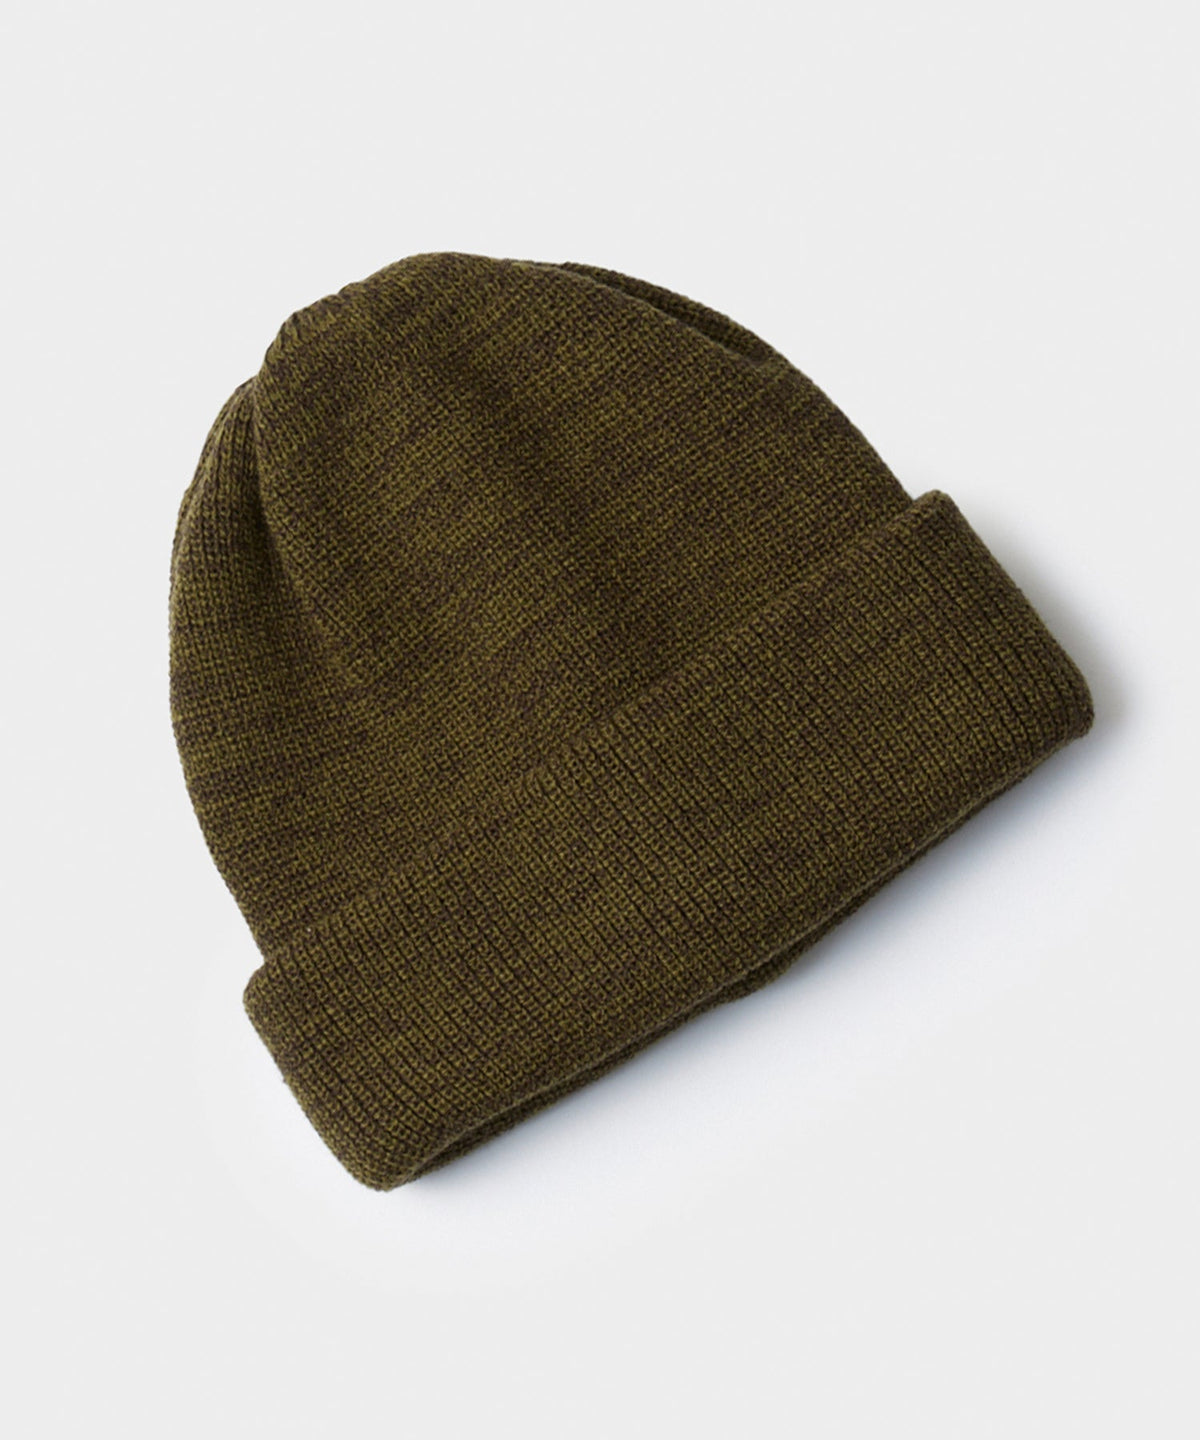 Rototo Bulky Watch Cap in Olive